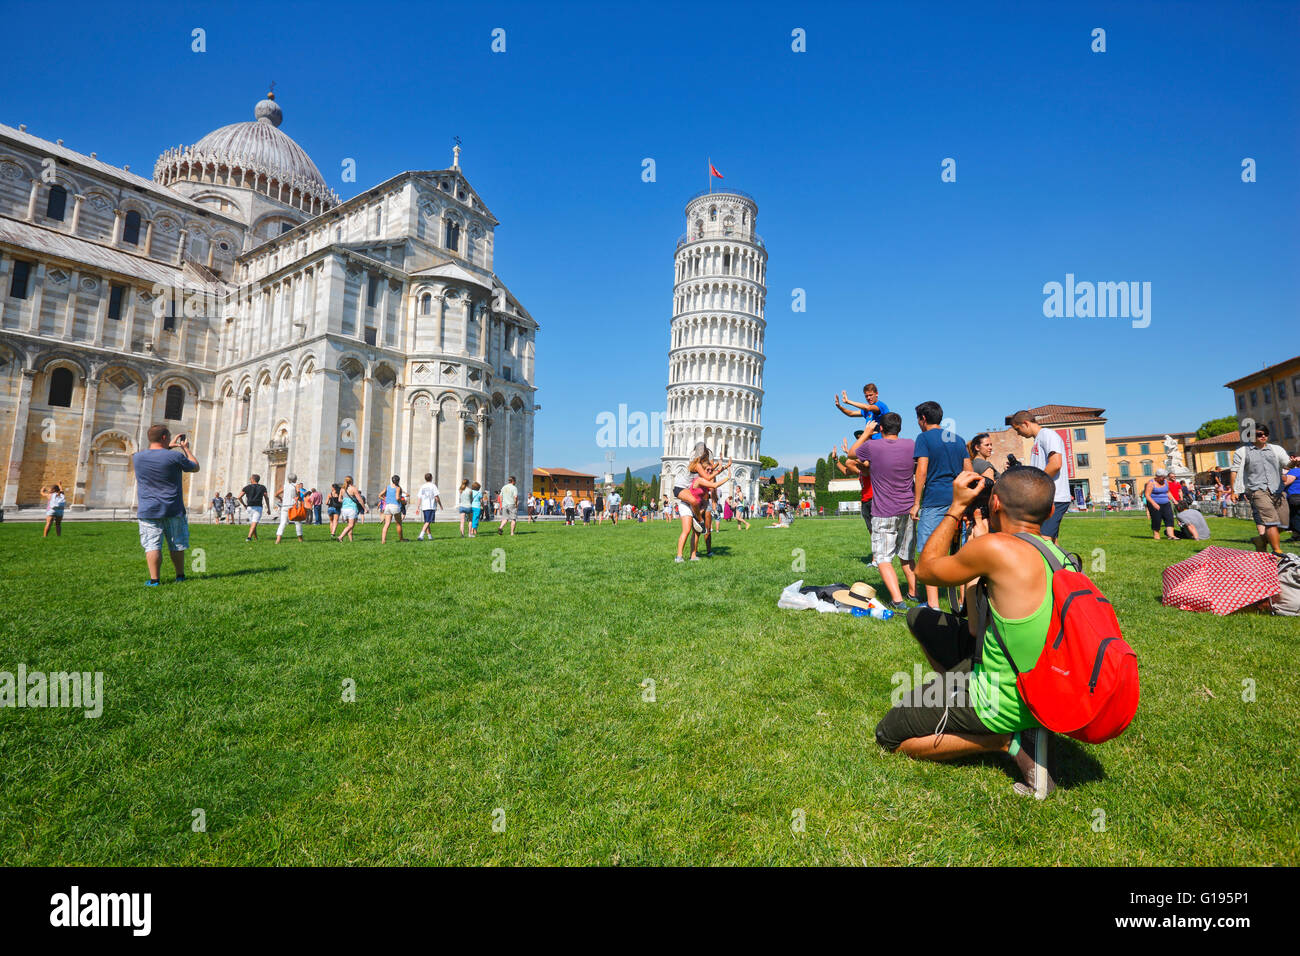 Group of tourists taking photos of the Leaning Tower of Pisa, Italy Stock Photo